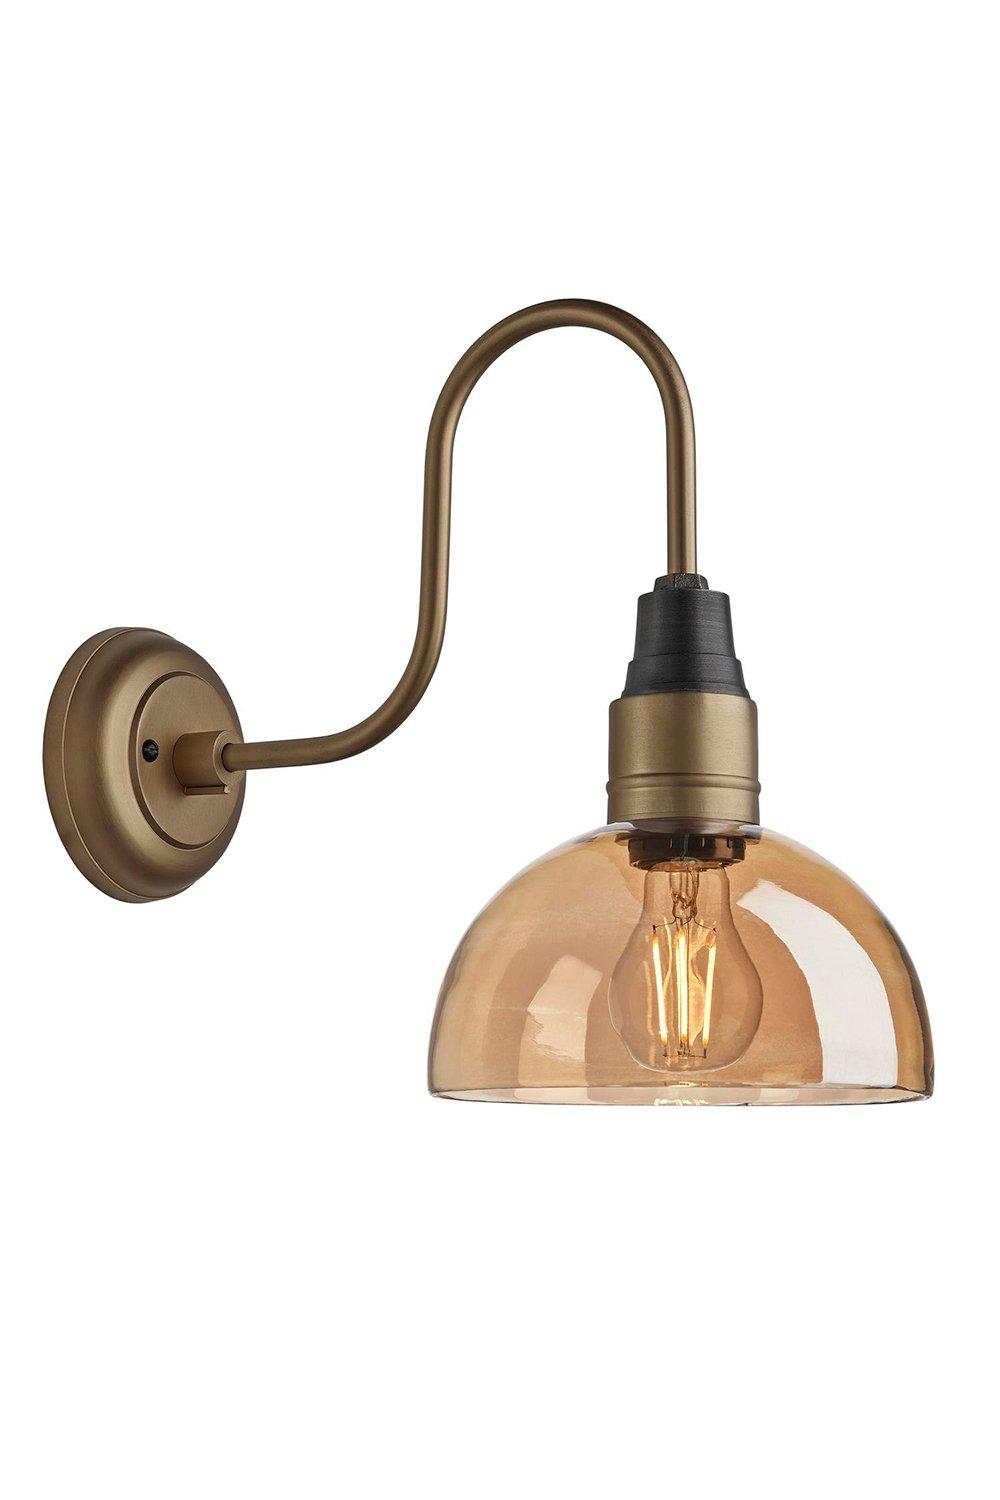 Swan Neck Tinted Glass Dome Wall Light, 8 Inch, Amber, Brass Holder